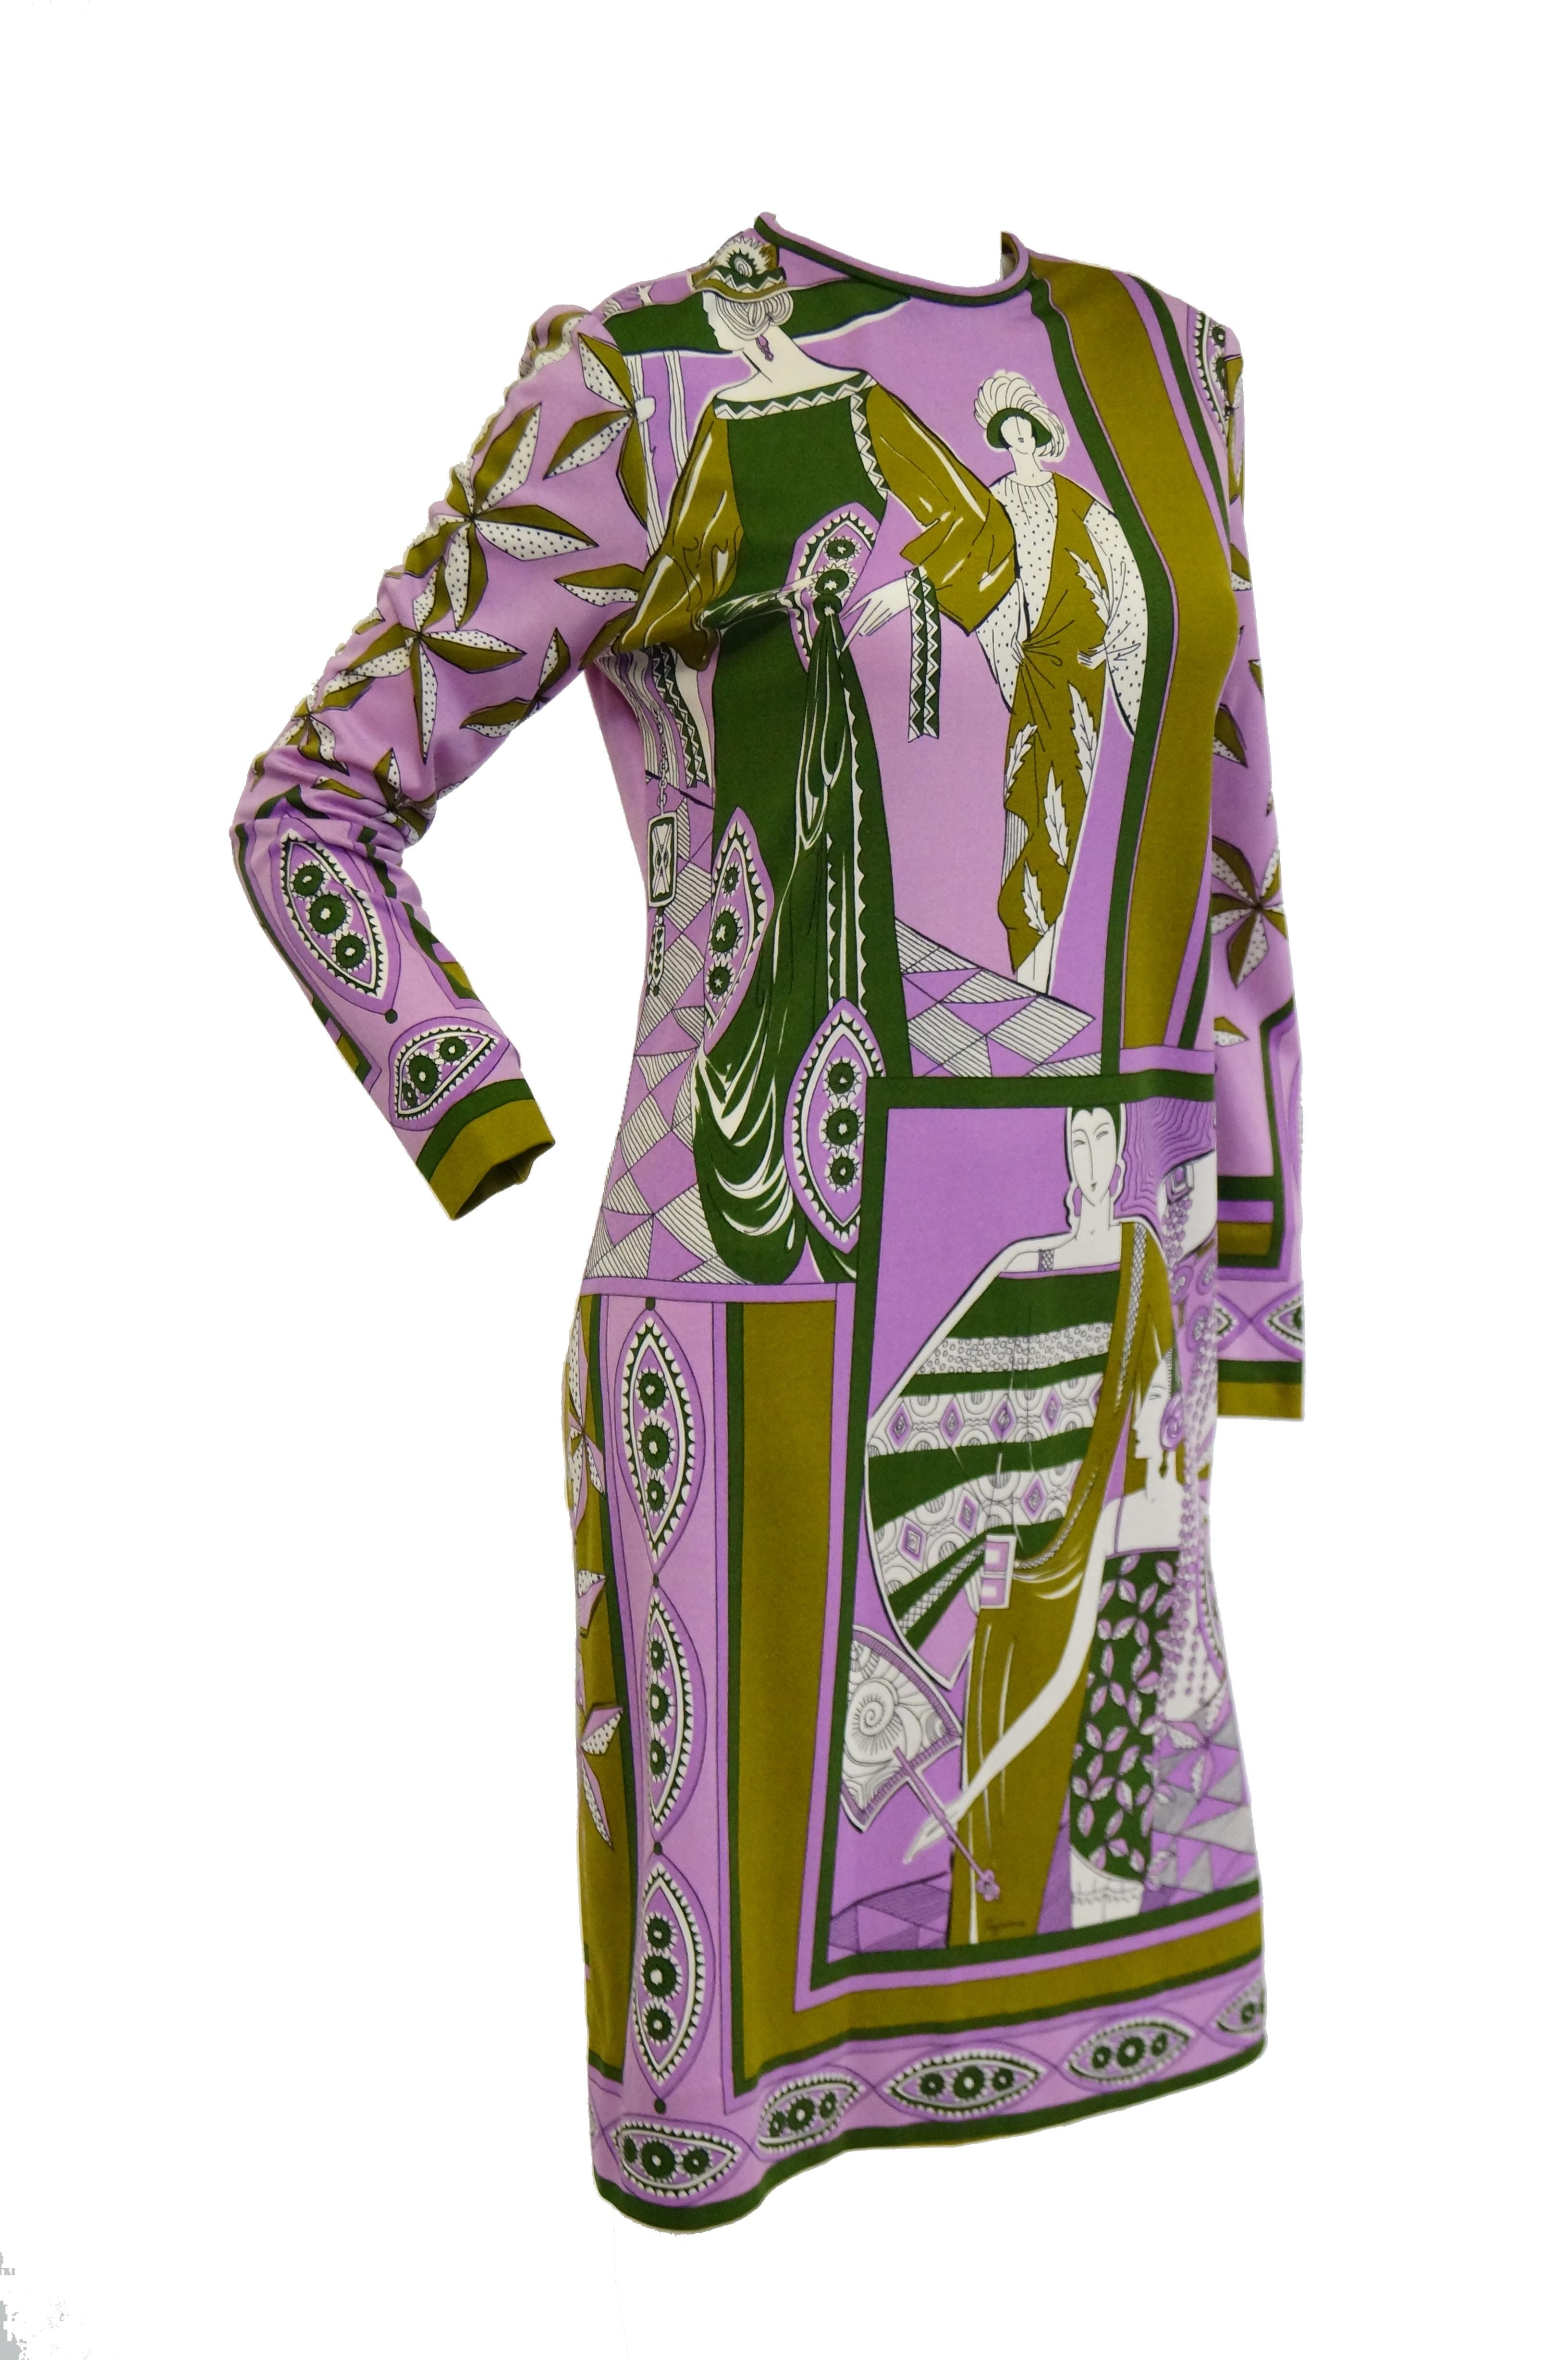 Bold 1960s - does - 1920s Art Deco print dress by Paganne! The dress falls below the knee, has long sleeves, and a jewel neckline. The dress has a loose sheath silhouette, with an A - line skirt and a more fitted bodice. The print is primarily